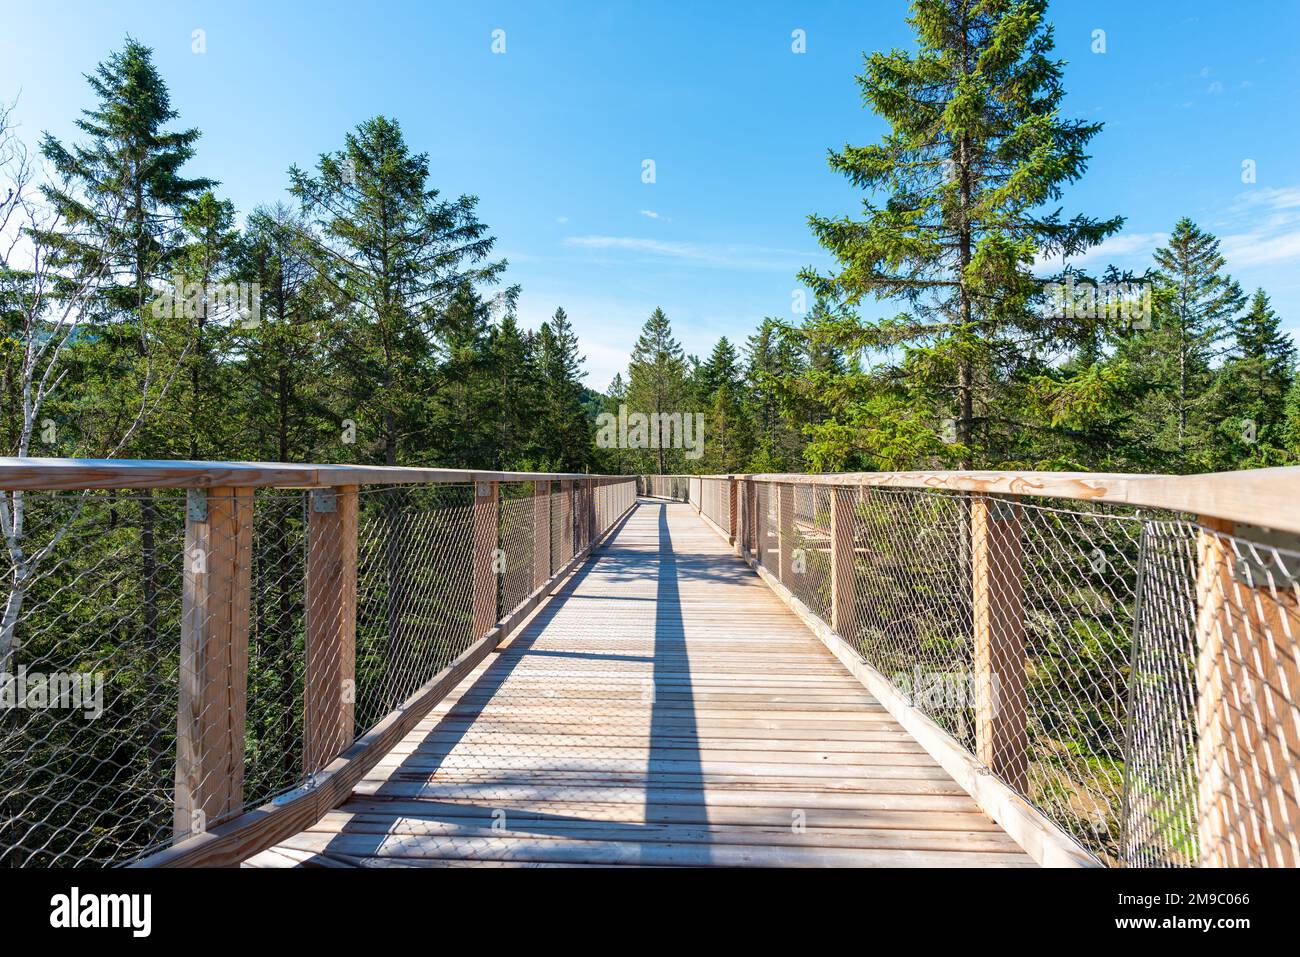 A wooden elevated boardwalk in the Laurentian boreal forest, Quebec, Canada. Taken on a sunny summer day with no people Stock Photo